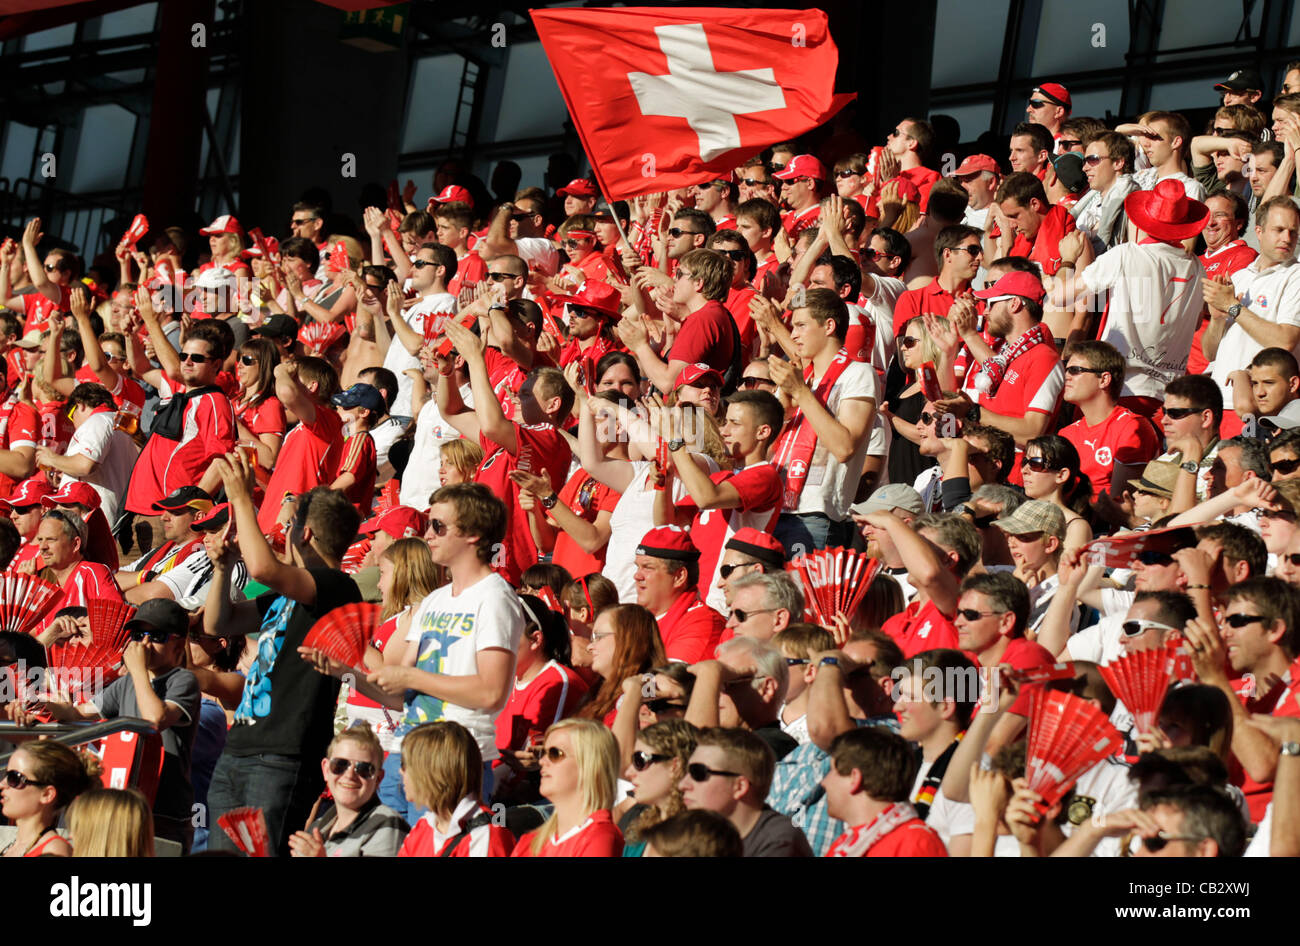 Fußball Fan Stadion High Resolution Stock Photography and Images - Alamy